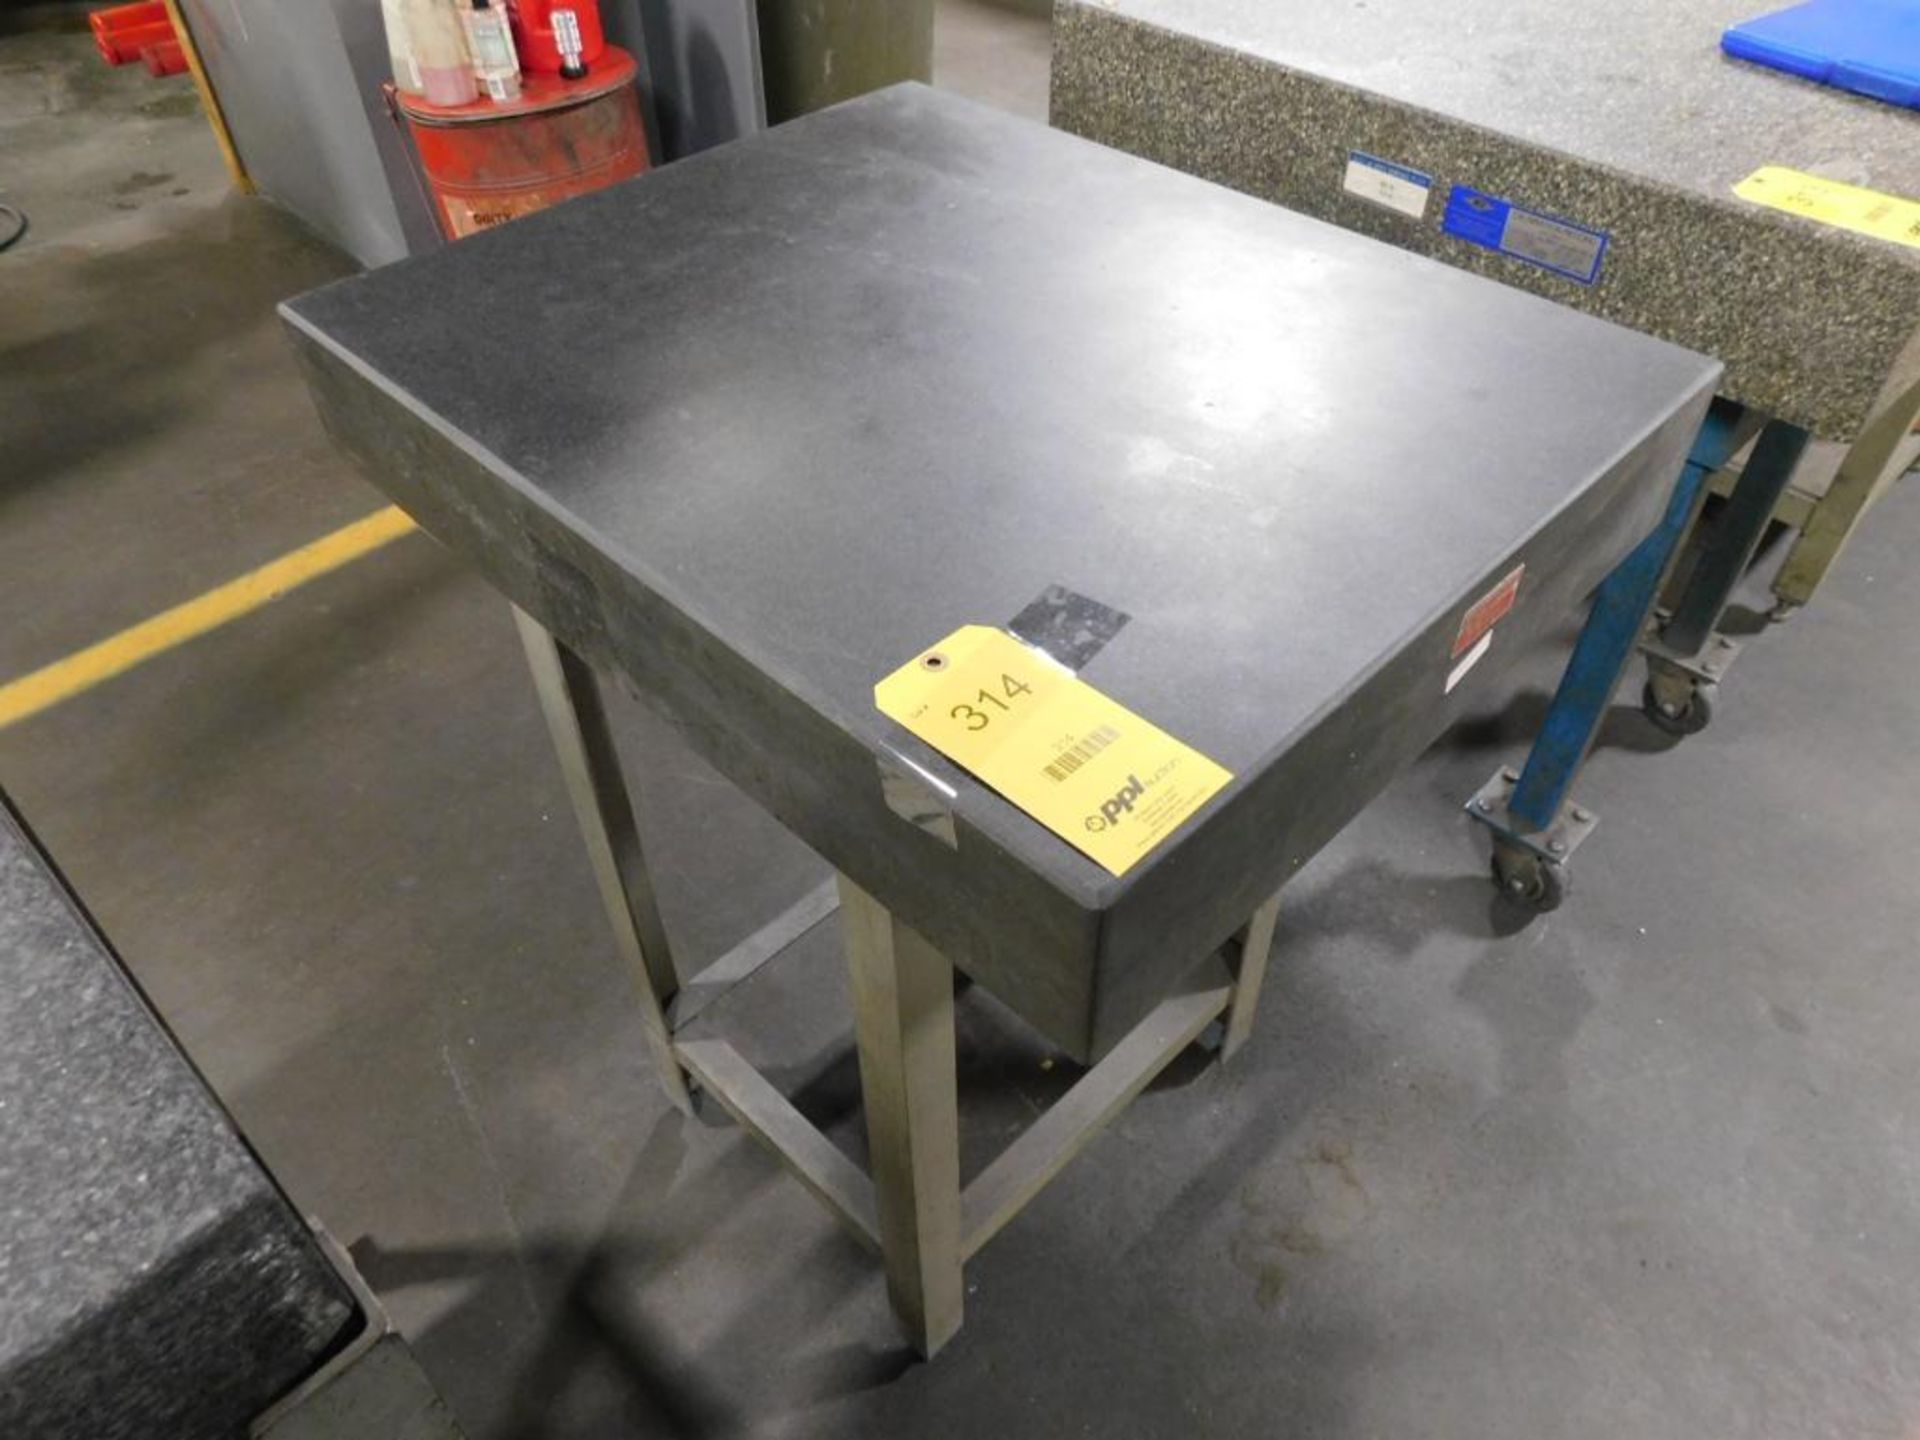 Mitutoyo 30" x 24" x 5" Granite Surface Plate on Stand